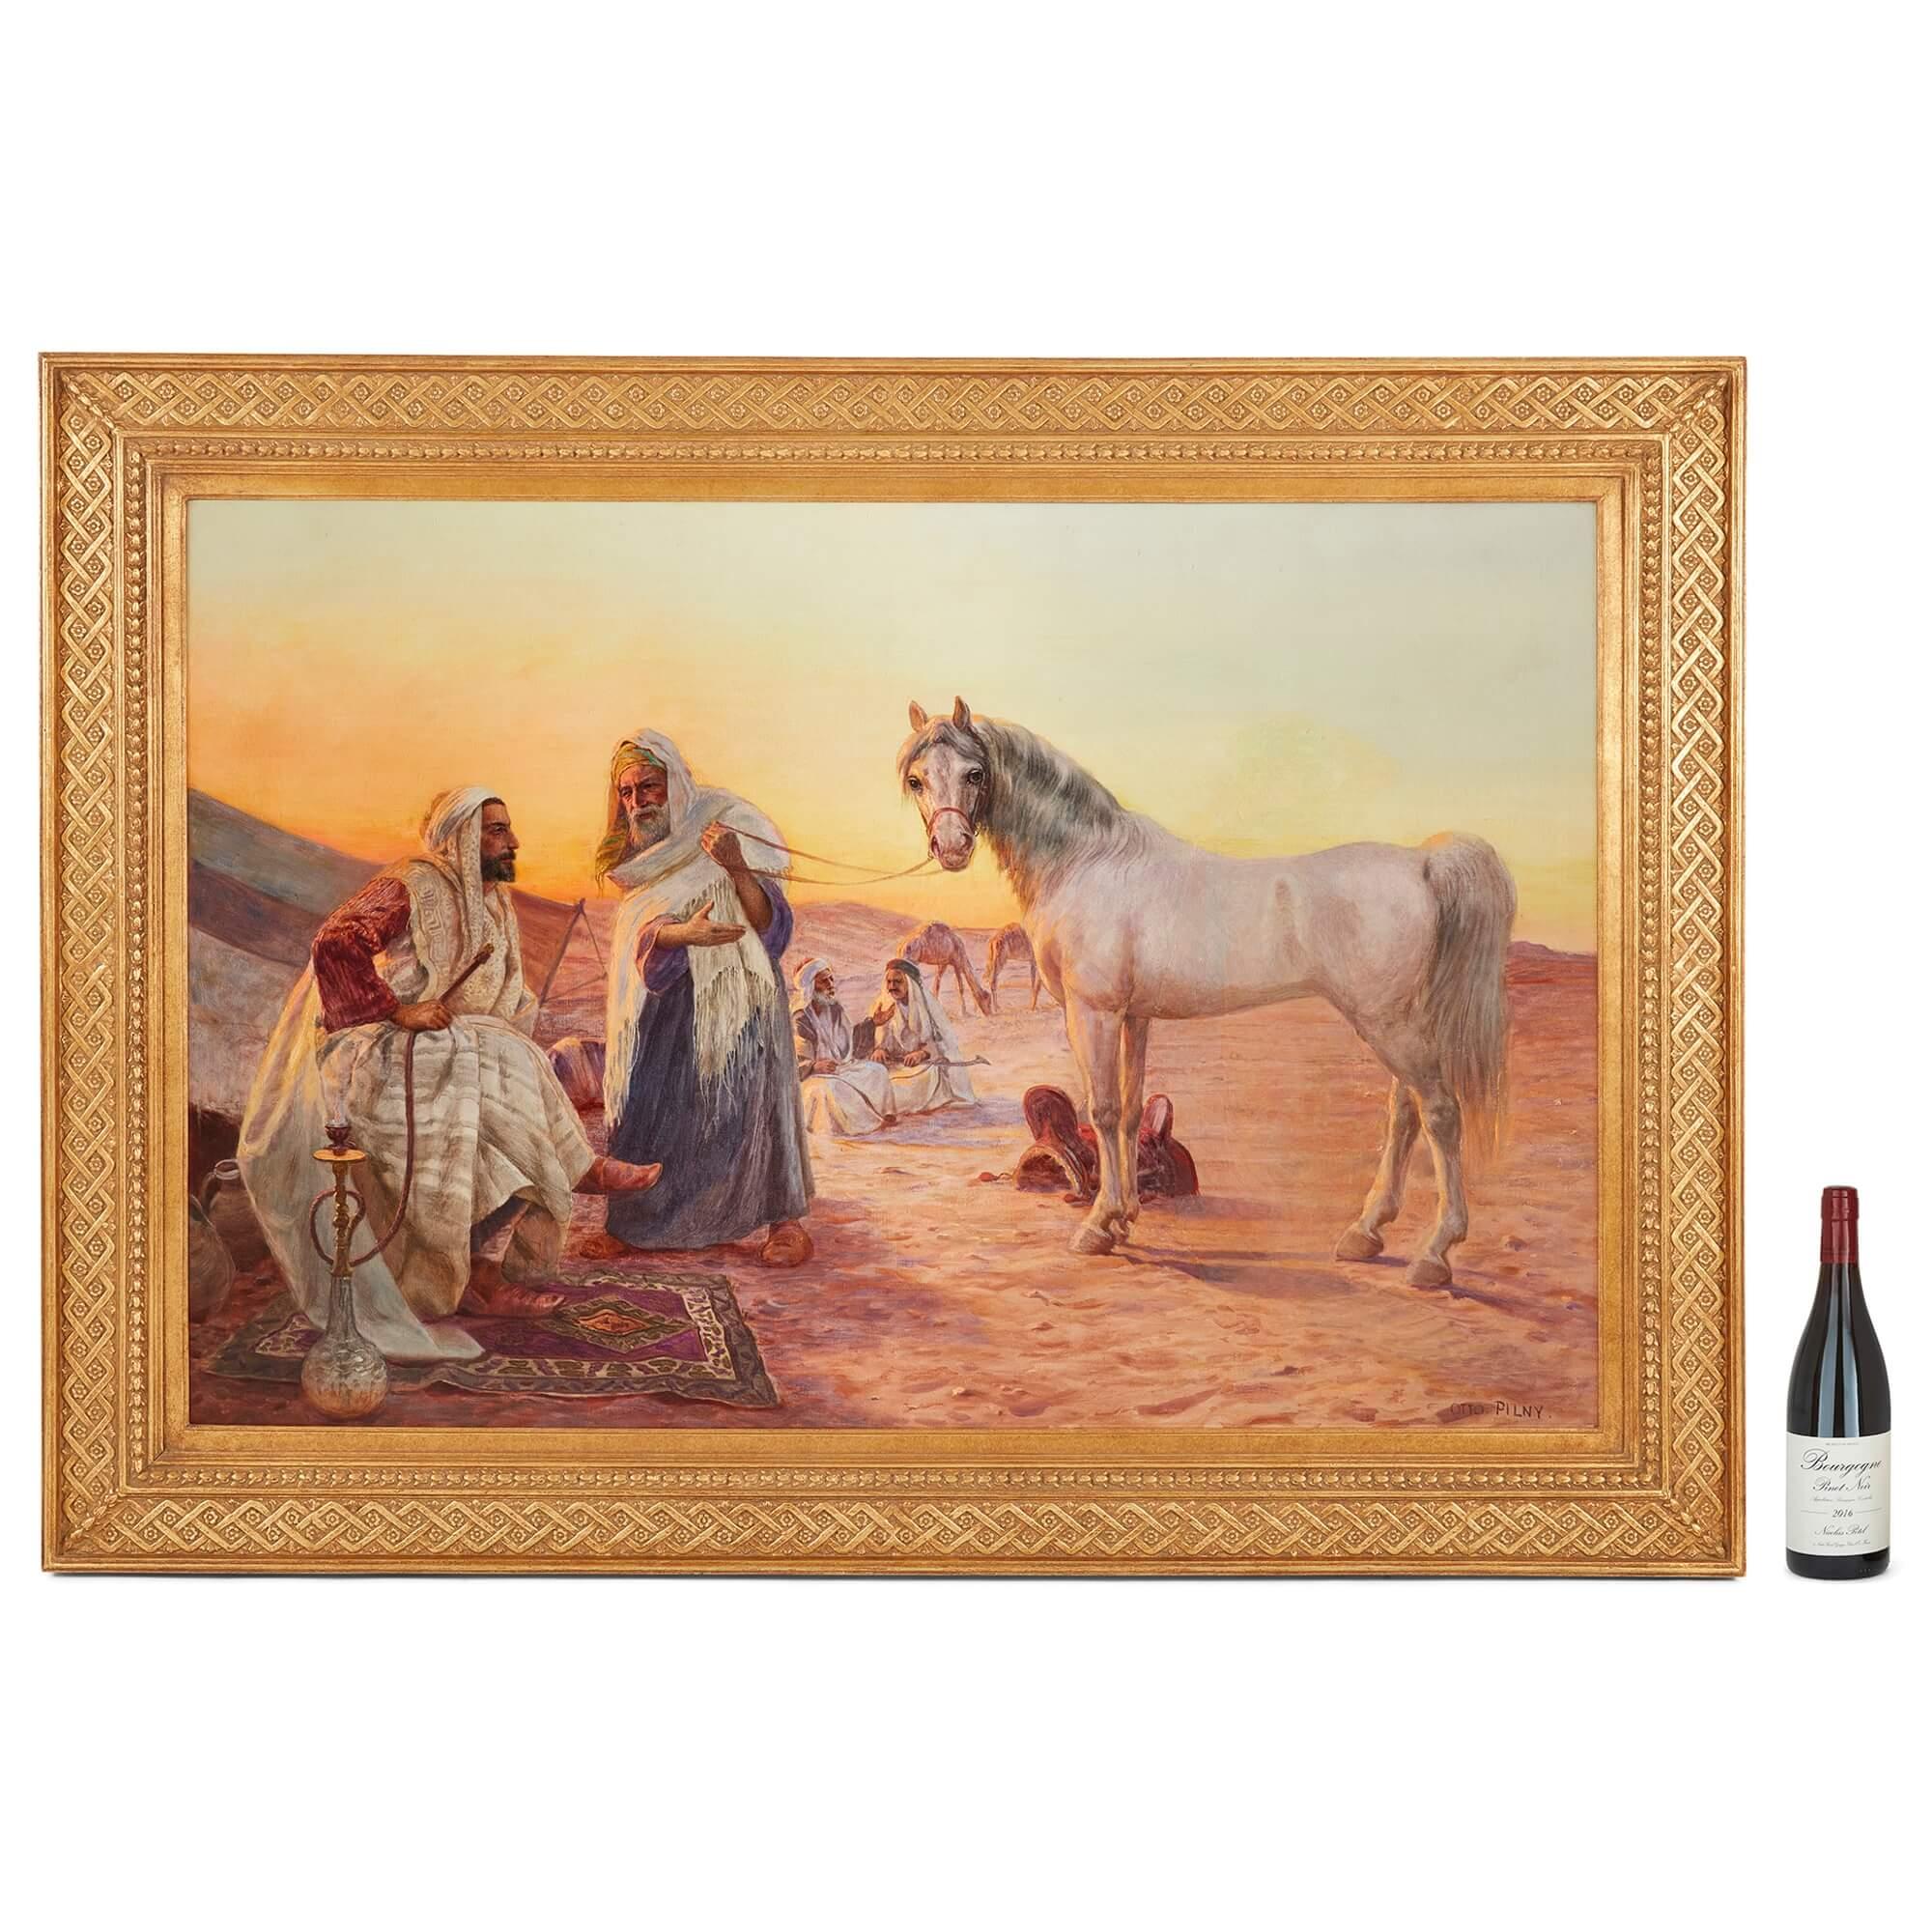 Orientalist Oil Painting Depicting the Trade of a Horse by Pilny For Sale 5